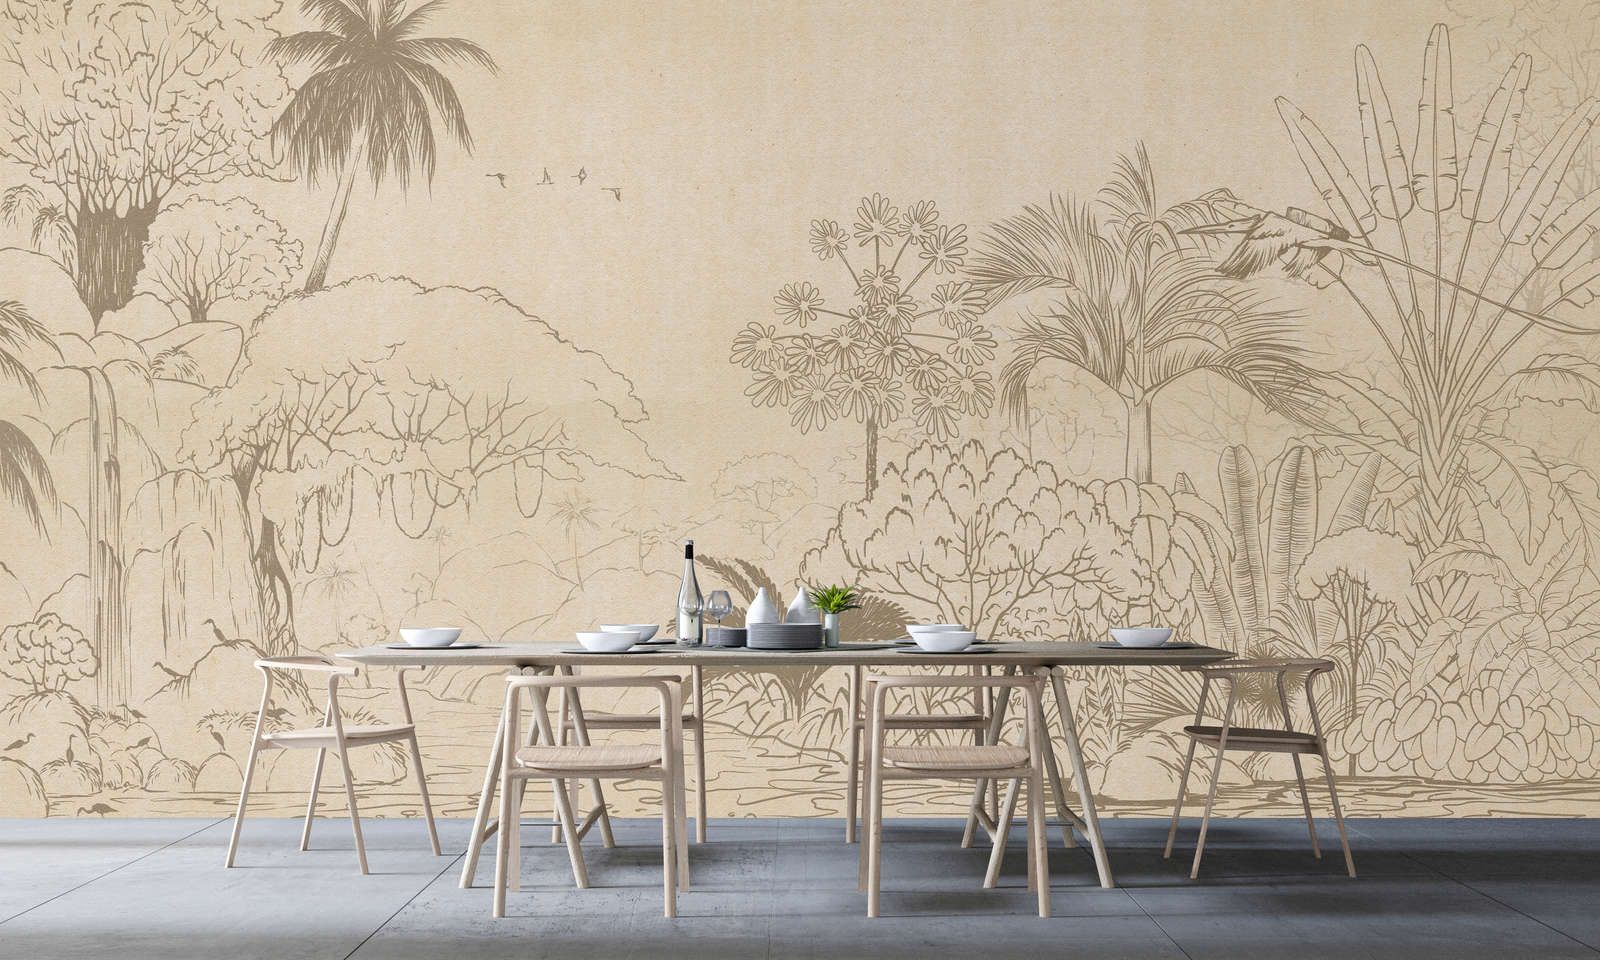             Photo wallpaper »oasis« - Jungle in drawing style with handmade paper look - Smooth, slightly shiny premium non-woven fabric
        